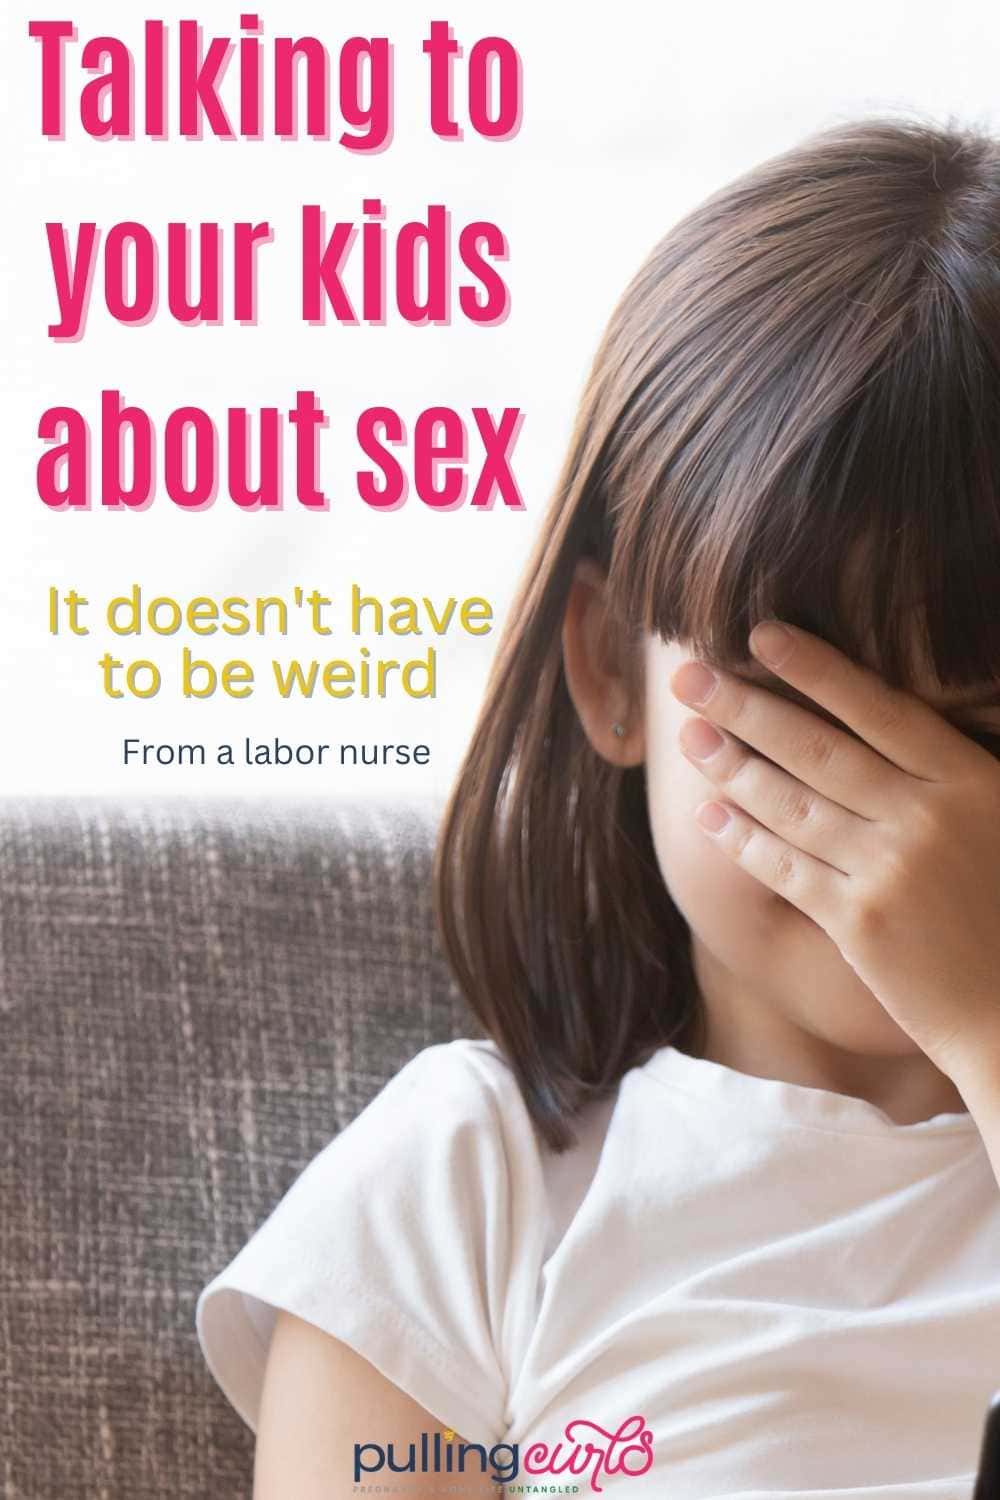 Talking to kids about sex might be uncomfortable -- but telling your kids where babies come from will be one of the most important things you will do. via @pullingcurls